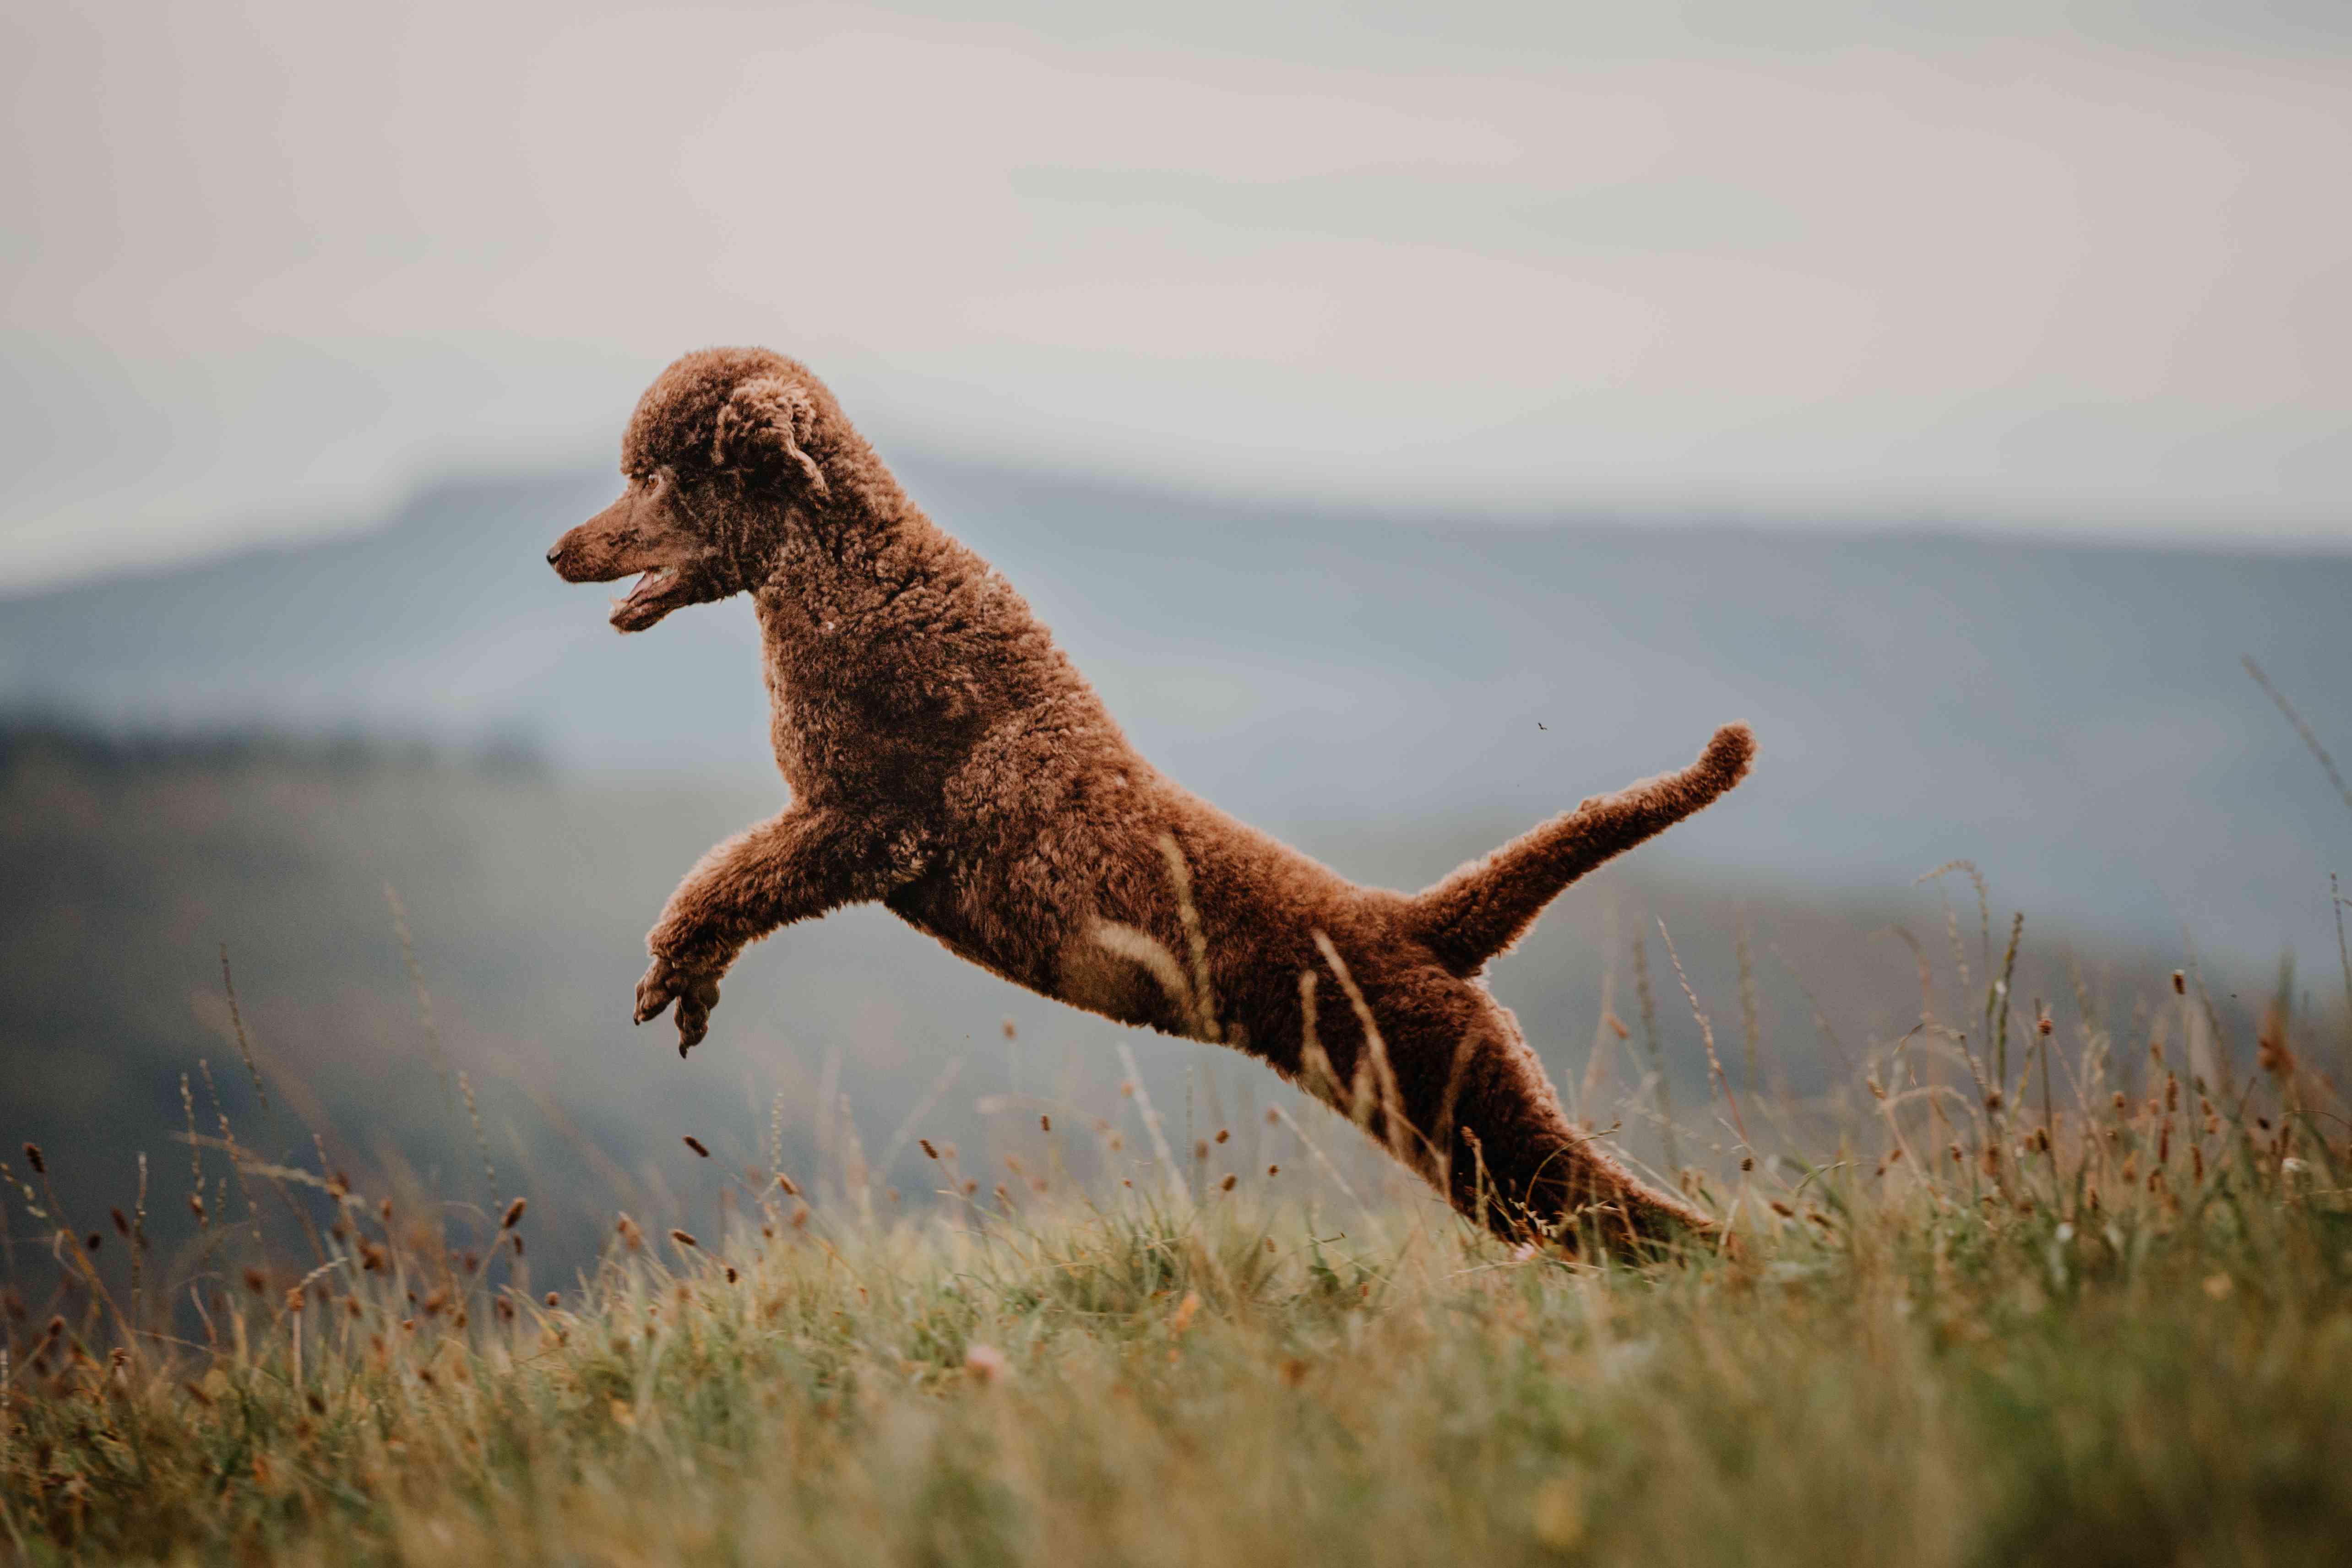 A brown Poodle jumping in the grass.